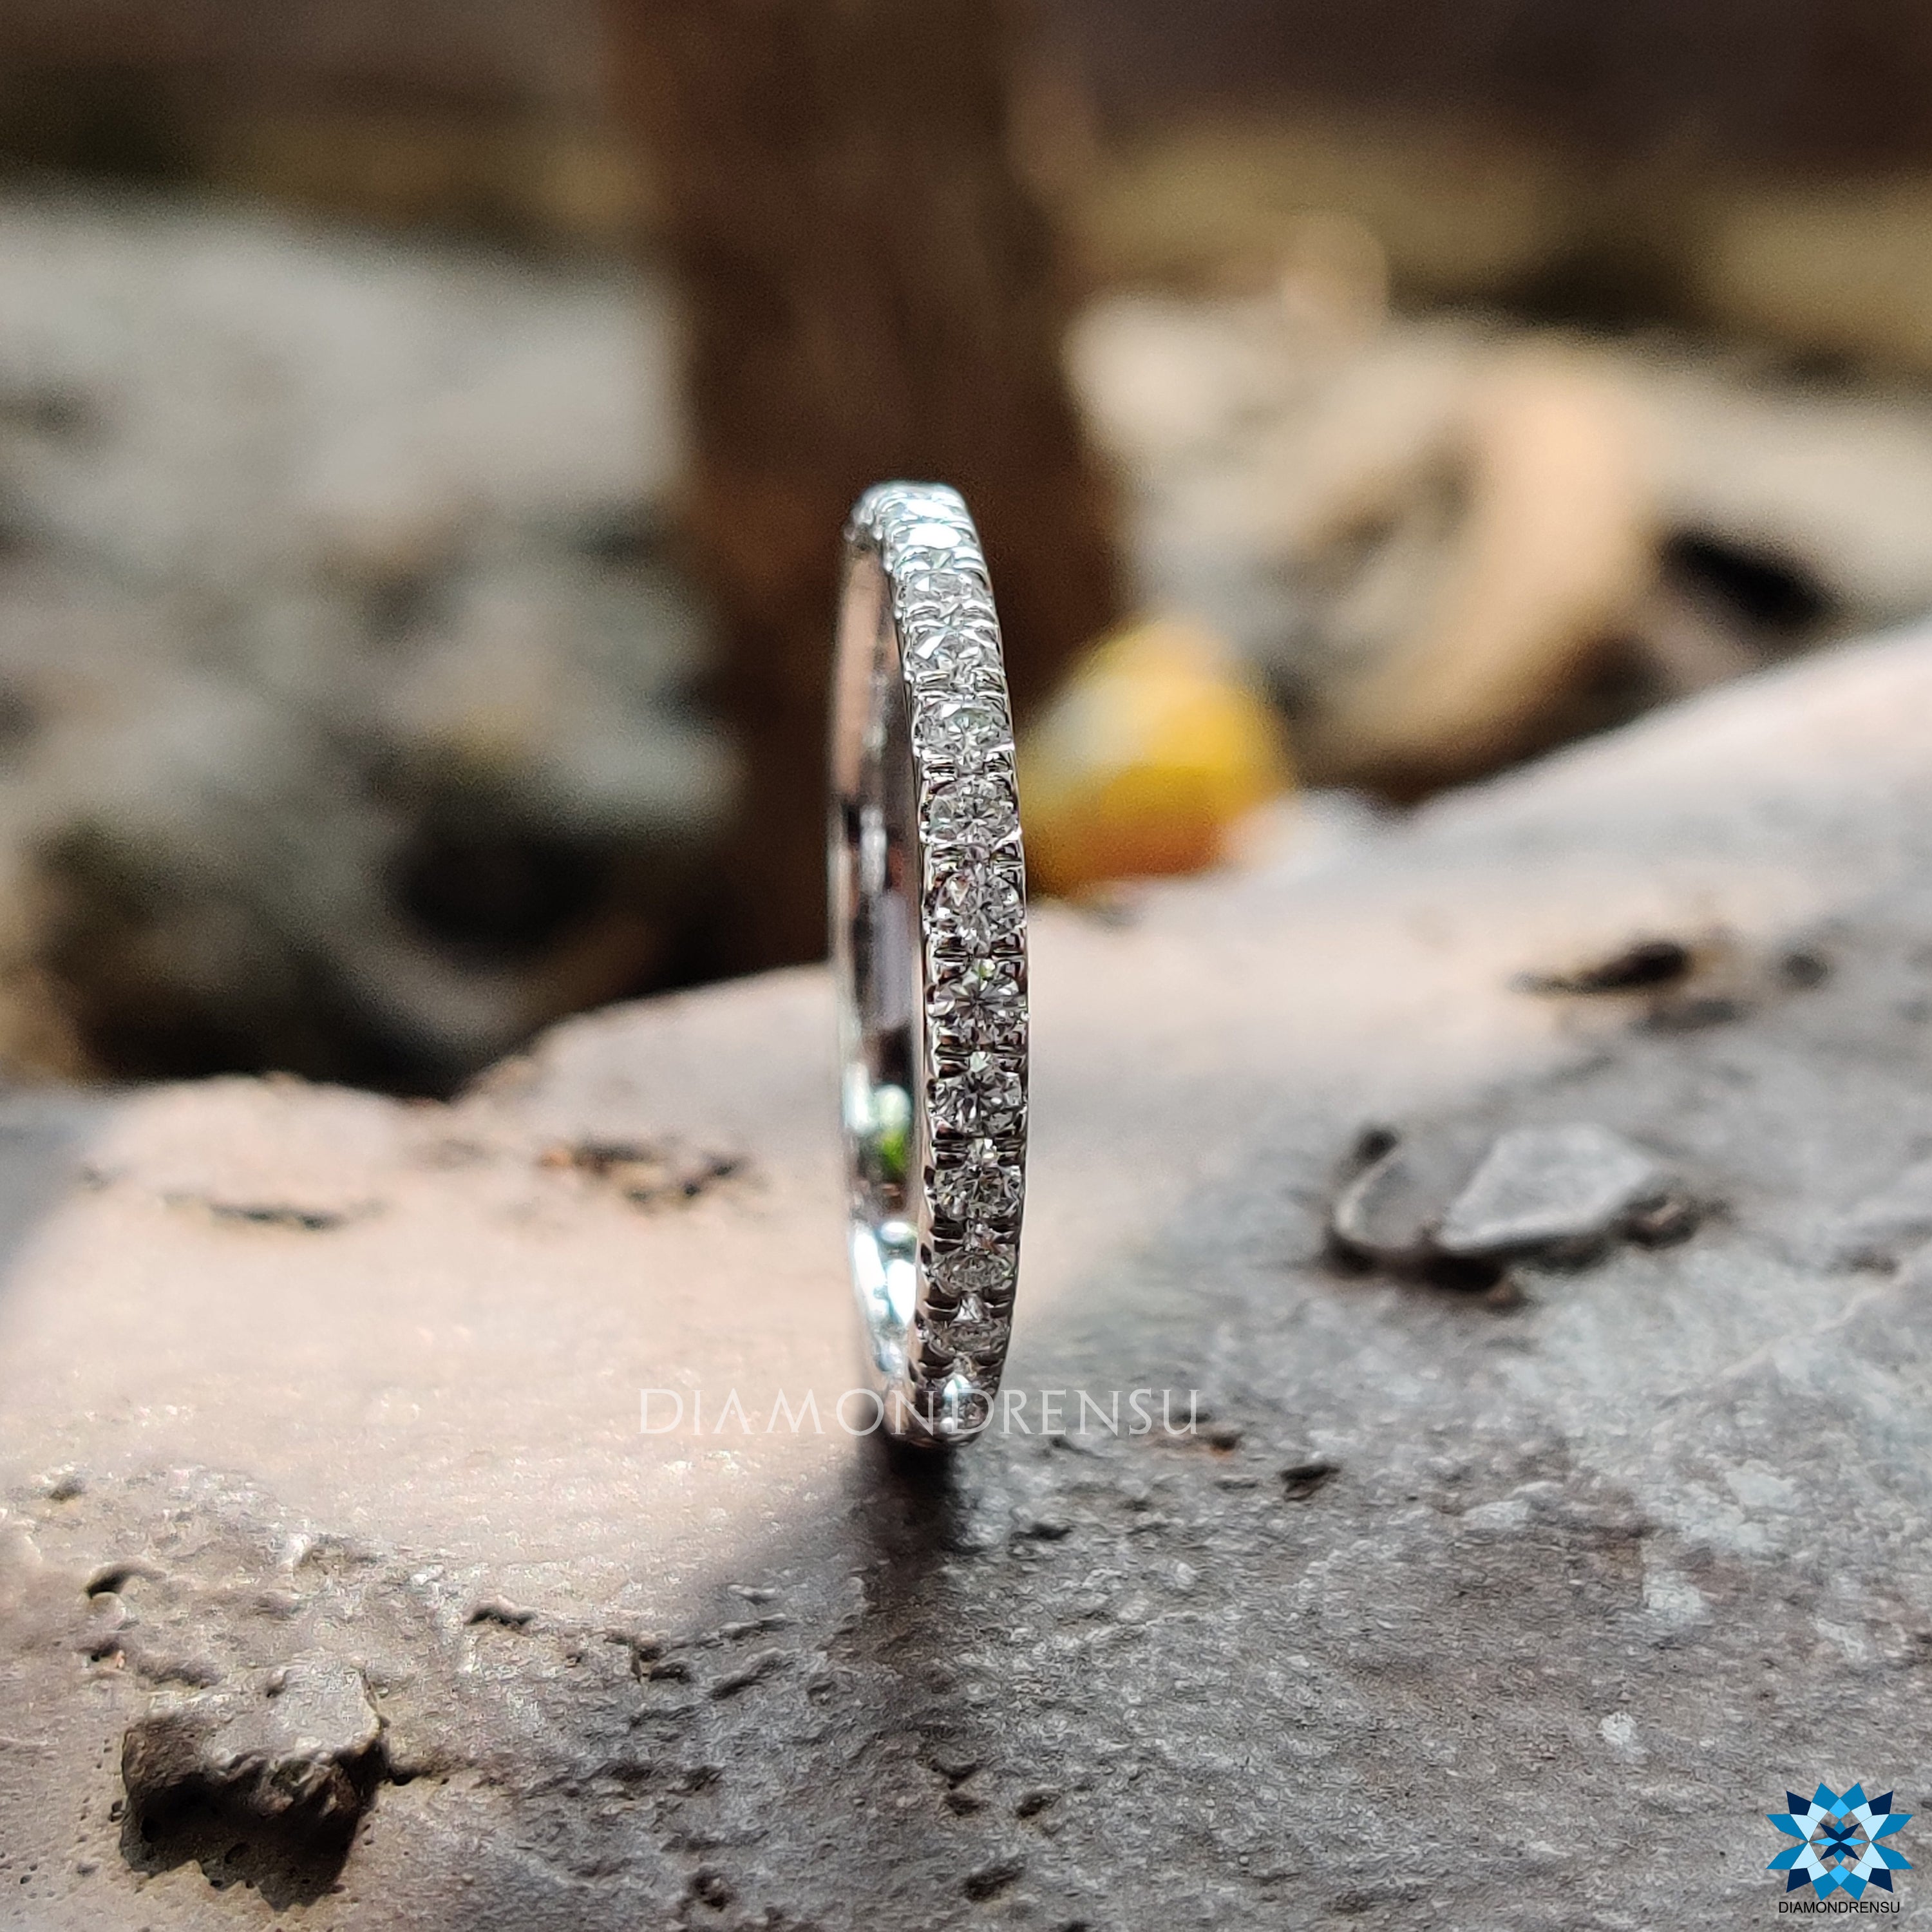 Diamond-Set Eternity Rings - From 77 With Love